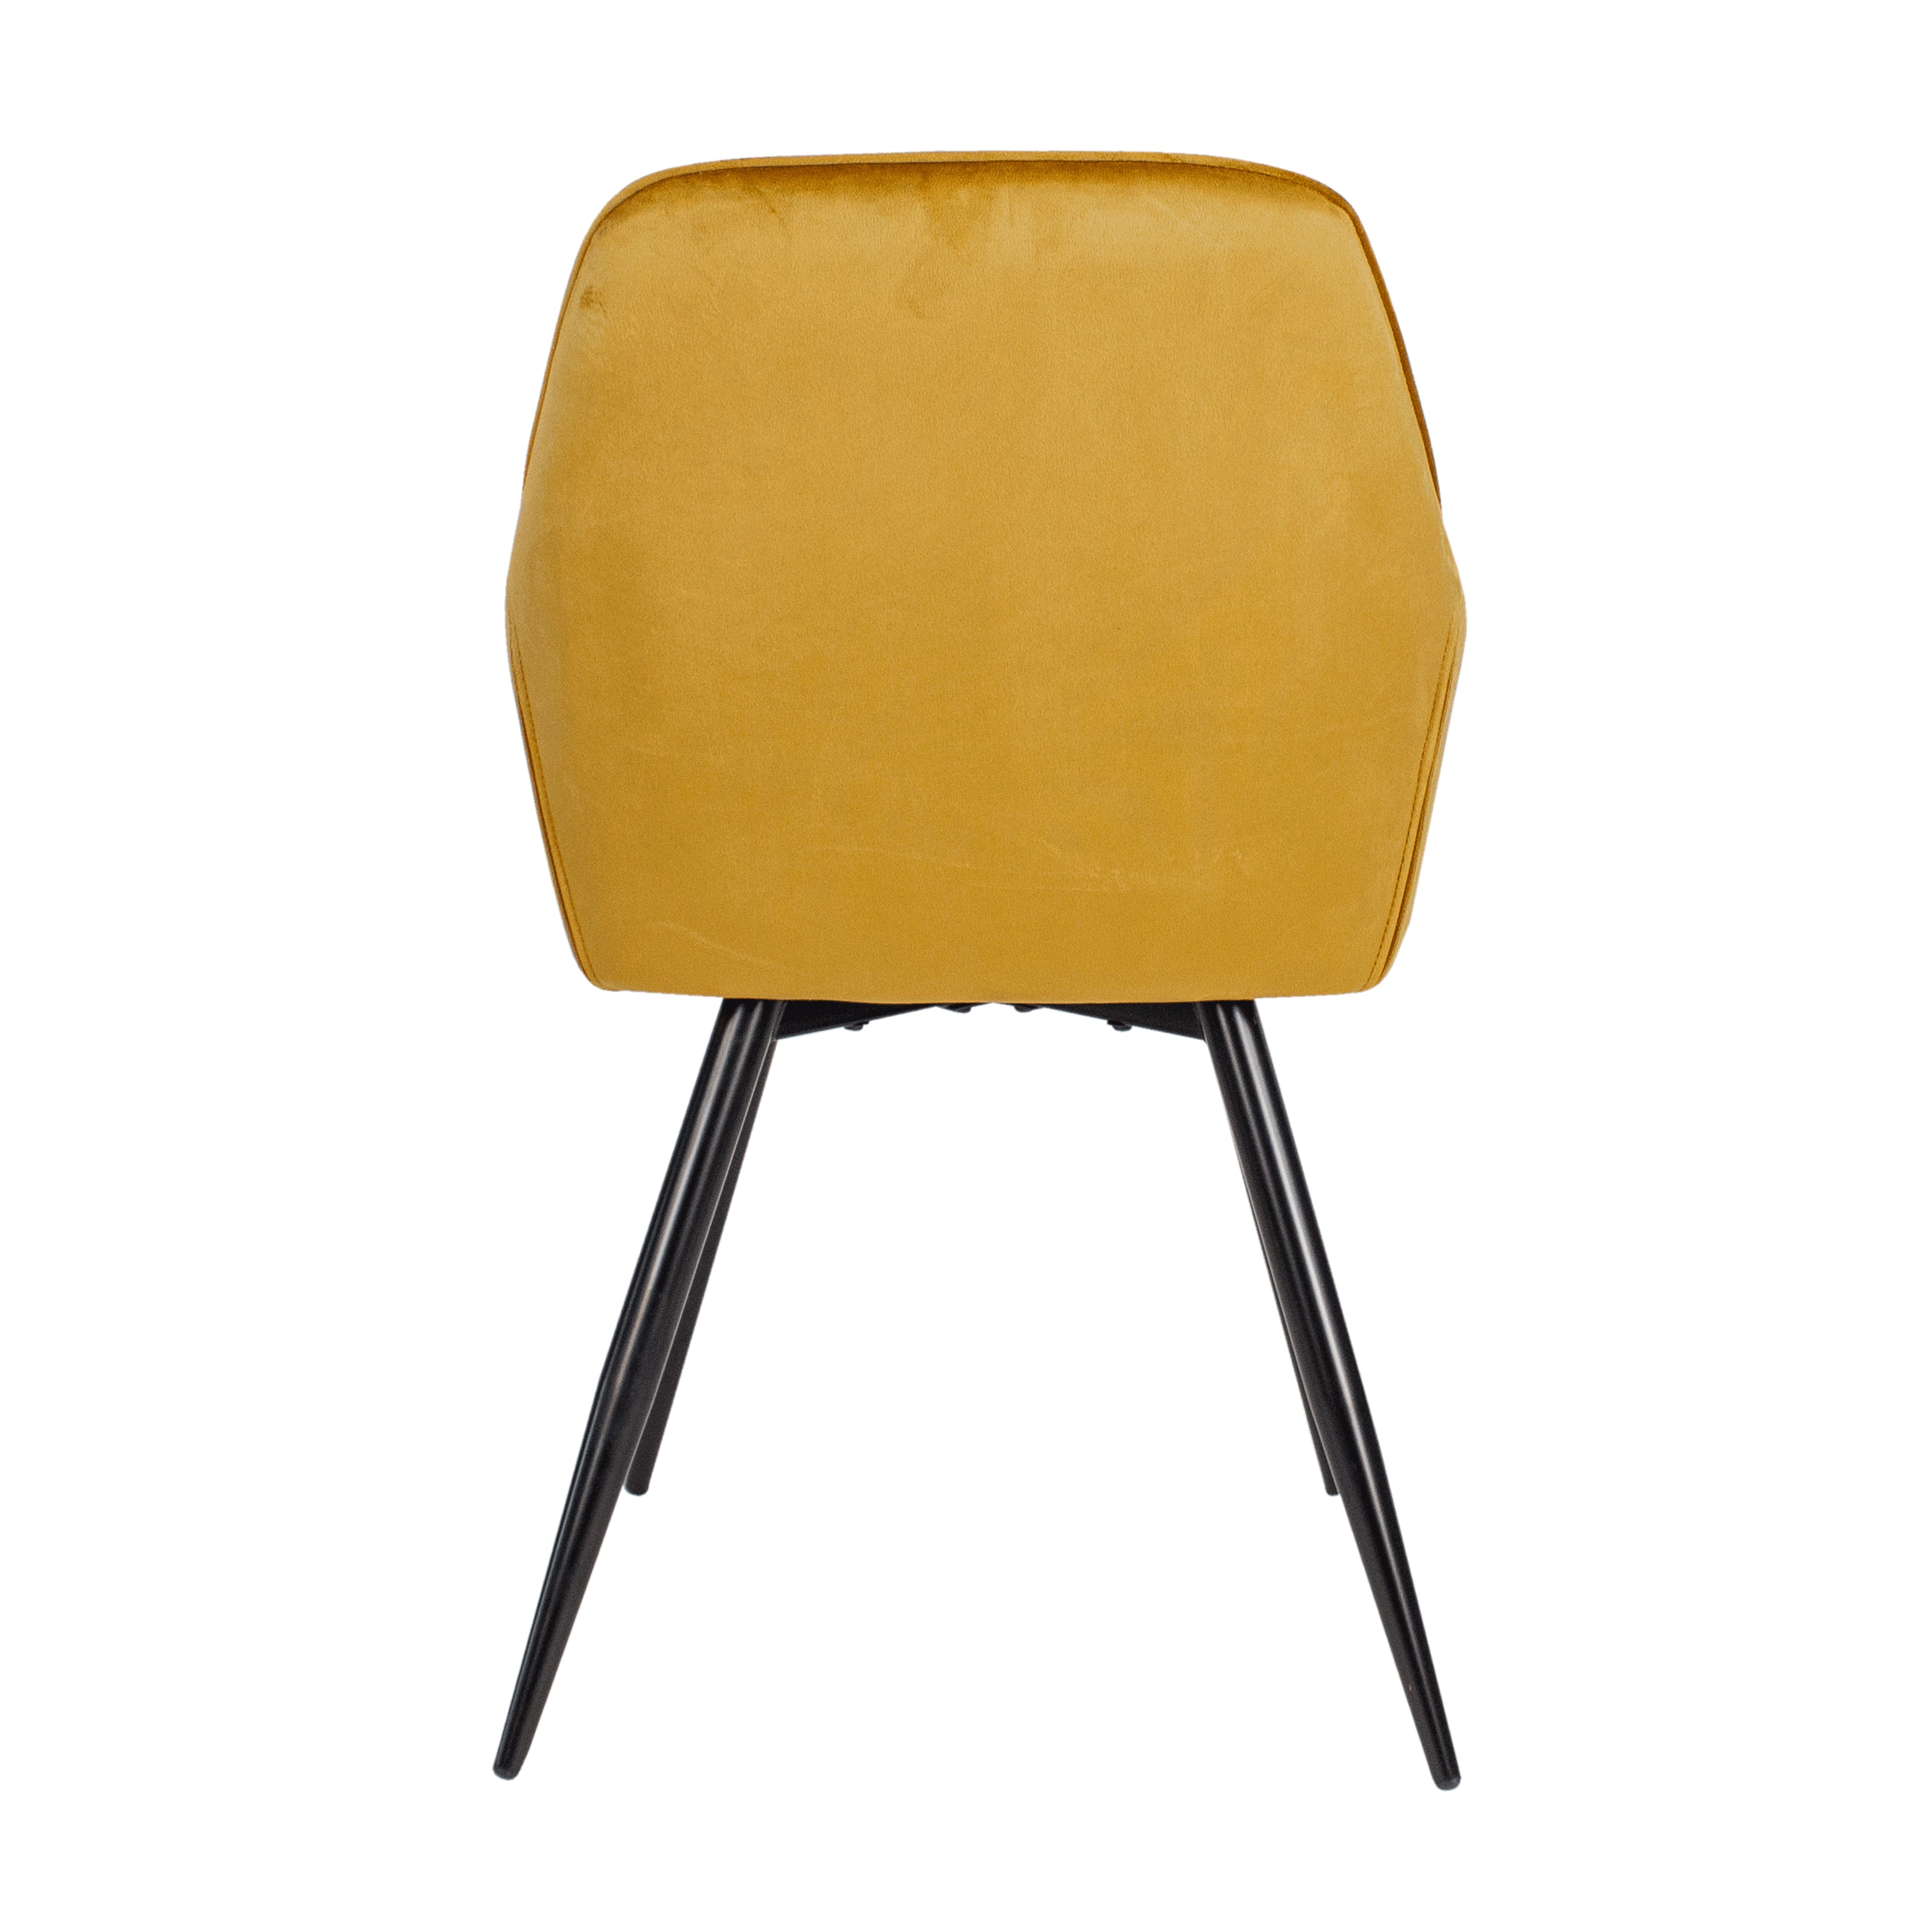 Kick dining room chair Monza